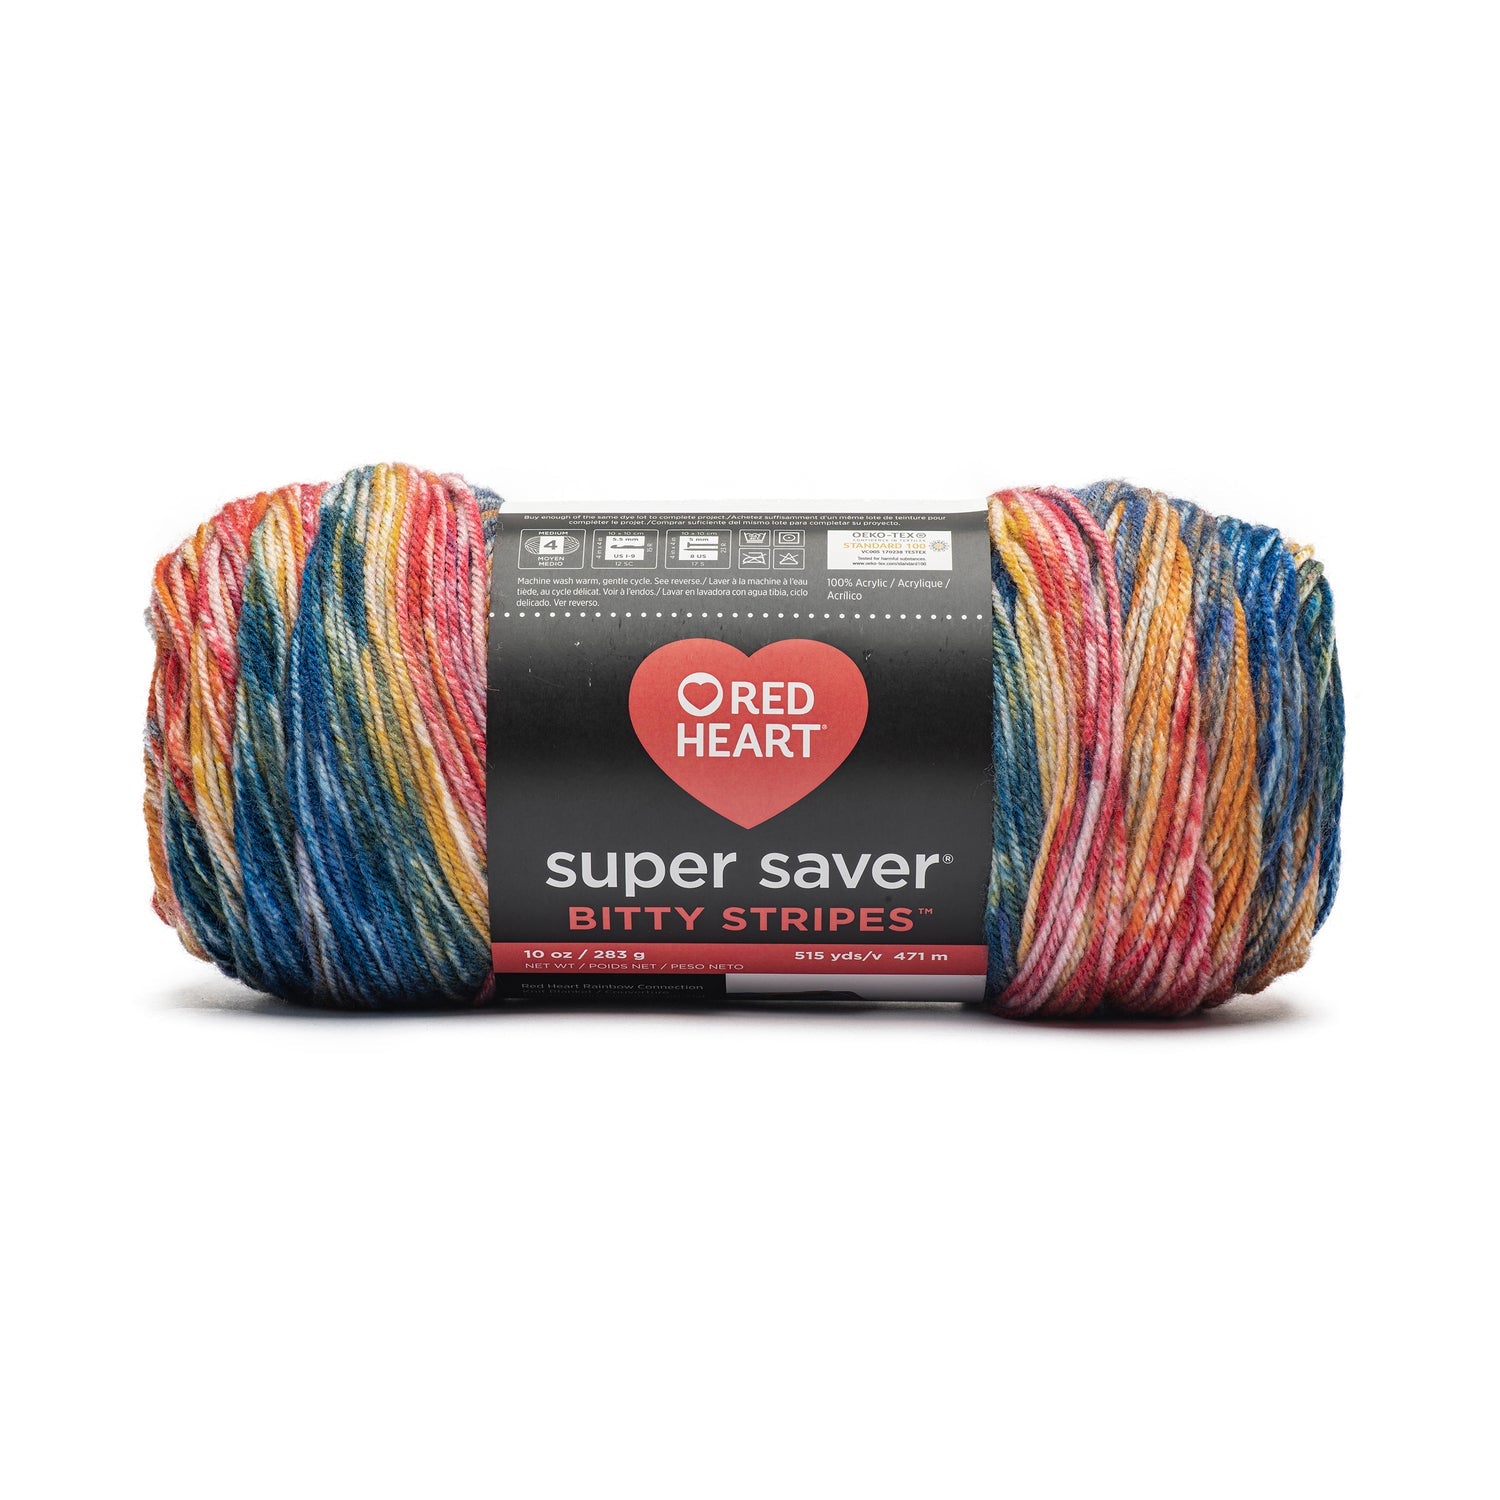 Red Heart Super Saver Bitty Stripes Yarn - Discontinued shades